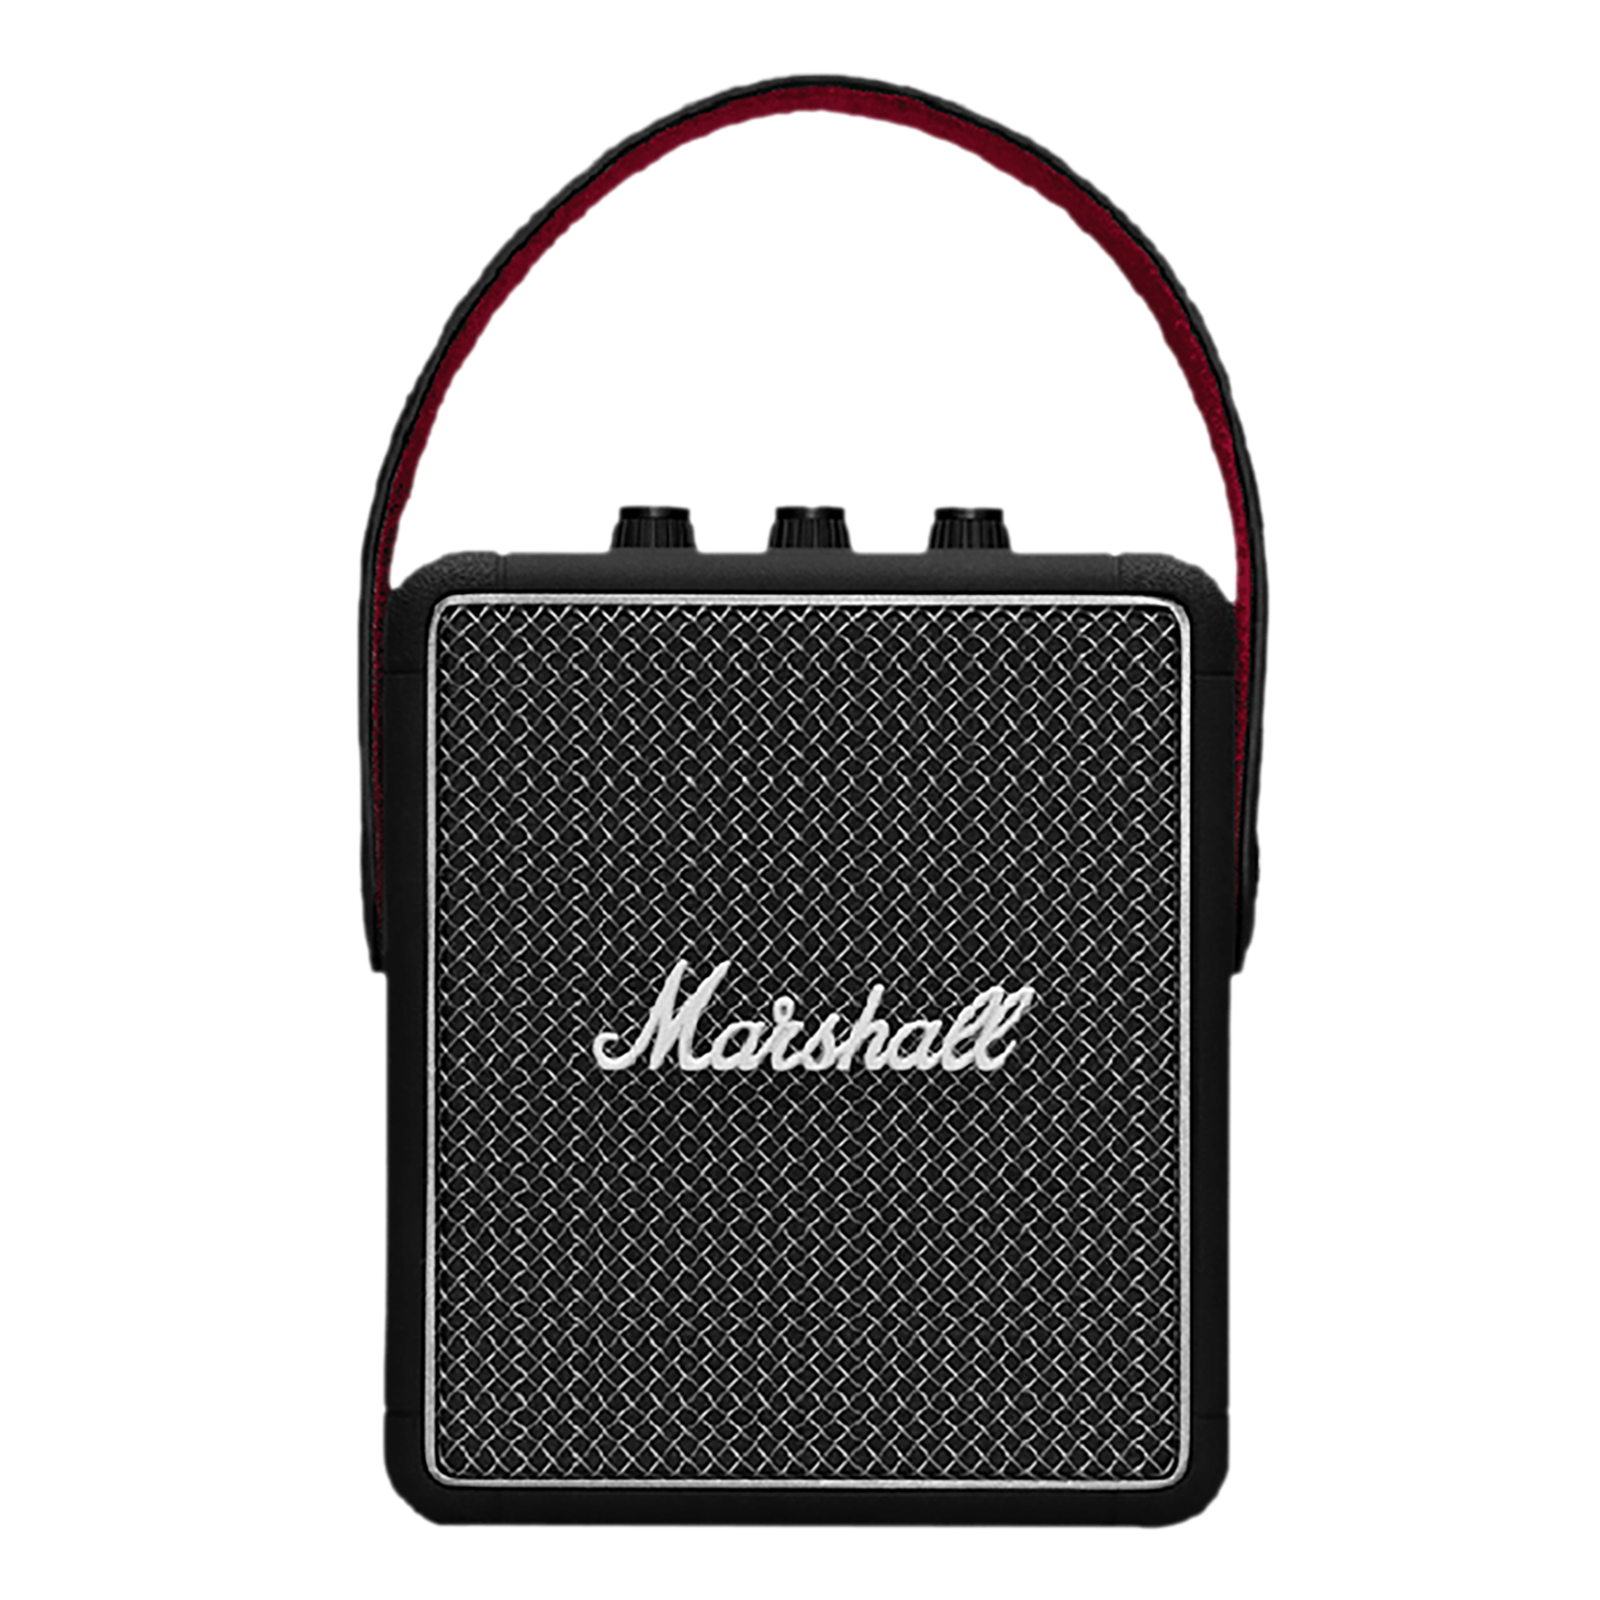 Buy Marshall Stanmore II 80W Bluetooth Speaker (Clean and Precise Audio,  Stereo Channel, Black) Online – Croma